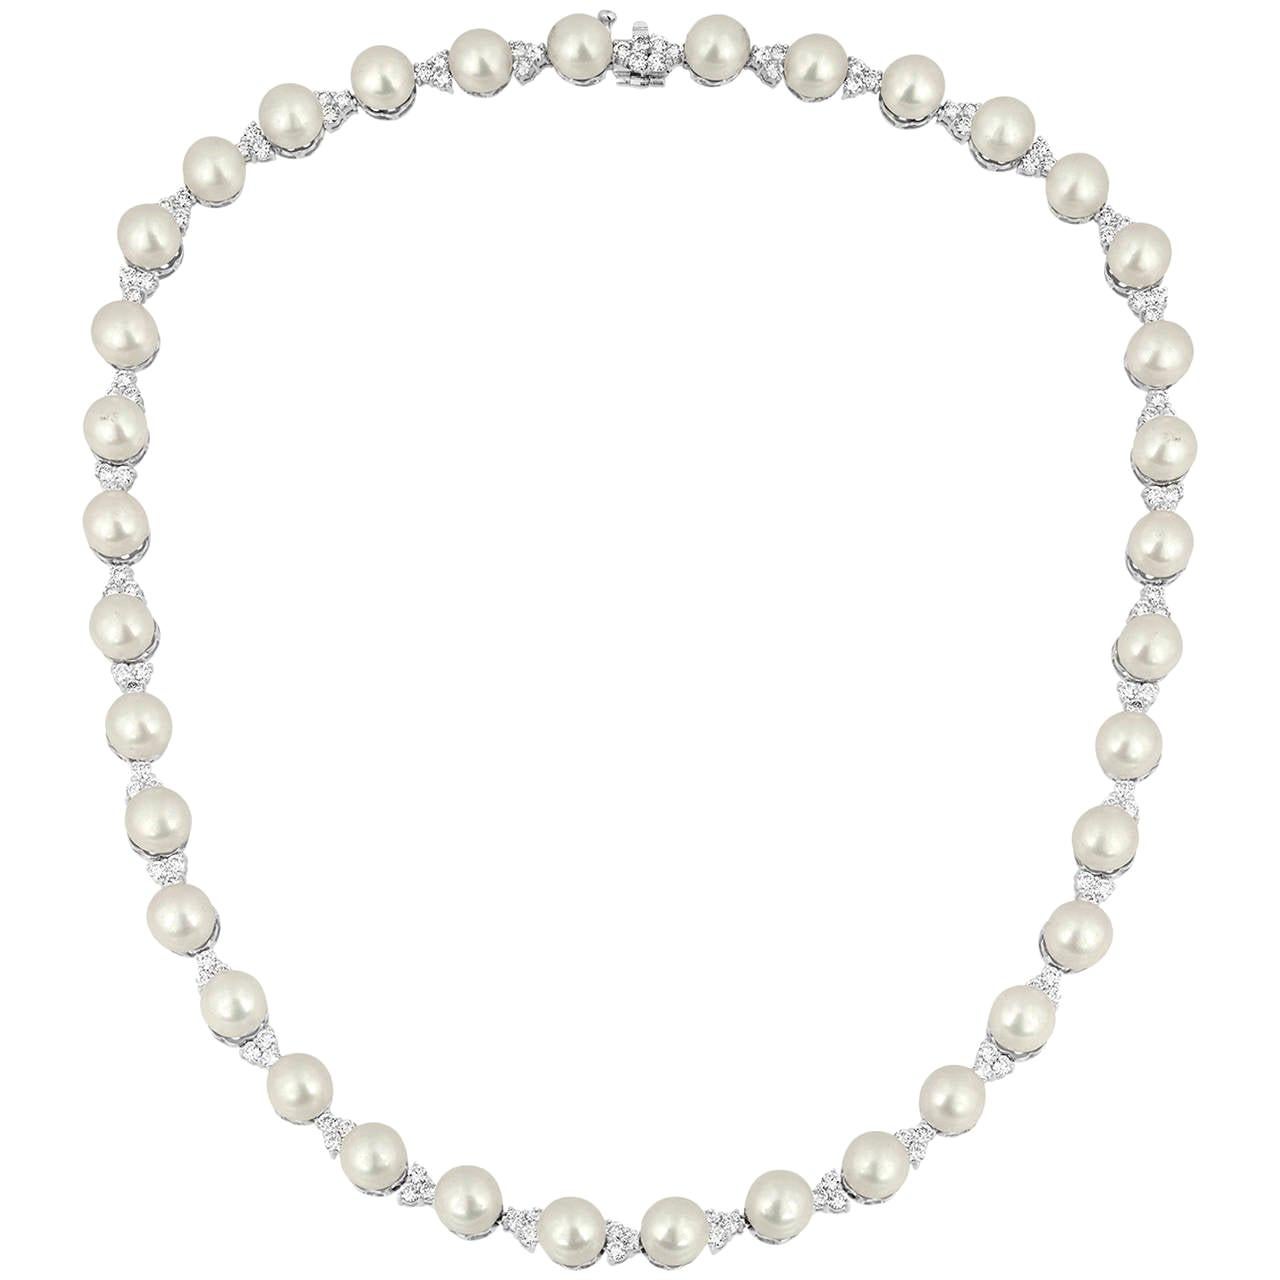 5.00 Carat Diamond and Pearl White Gold Necklace